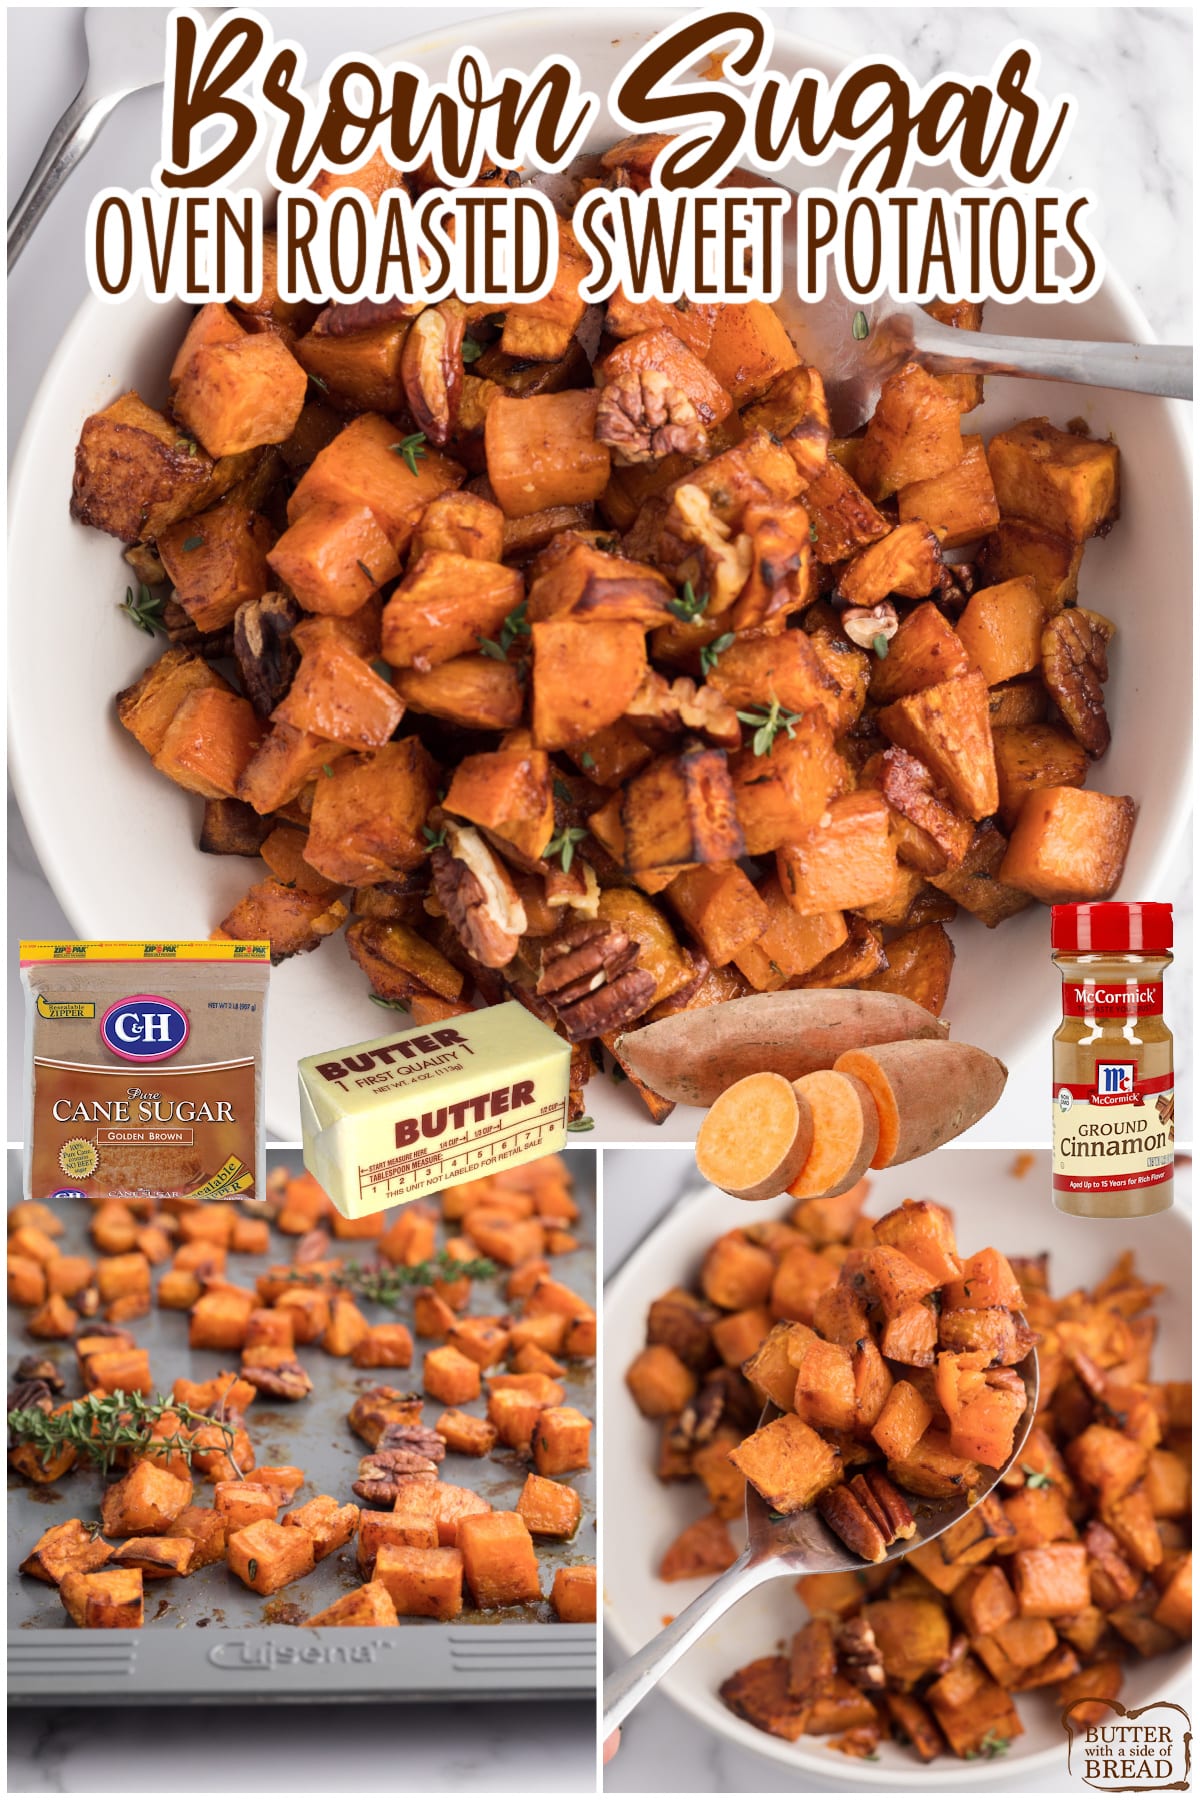 Brown Sugar Roasted Sweet Potatoes are a great side dish for any meal. Simple oven roasted sweet potato recipe made with brown sugar, cinnamon, thyme, butter and pecans.